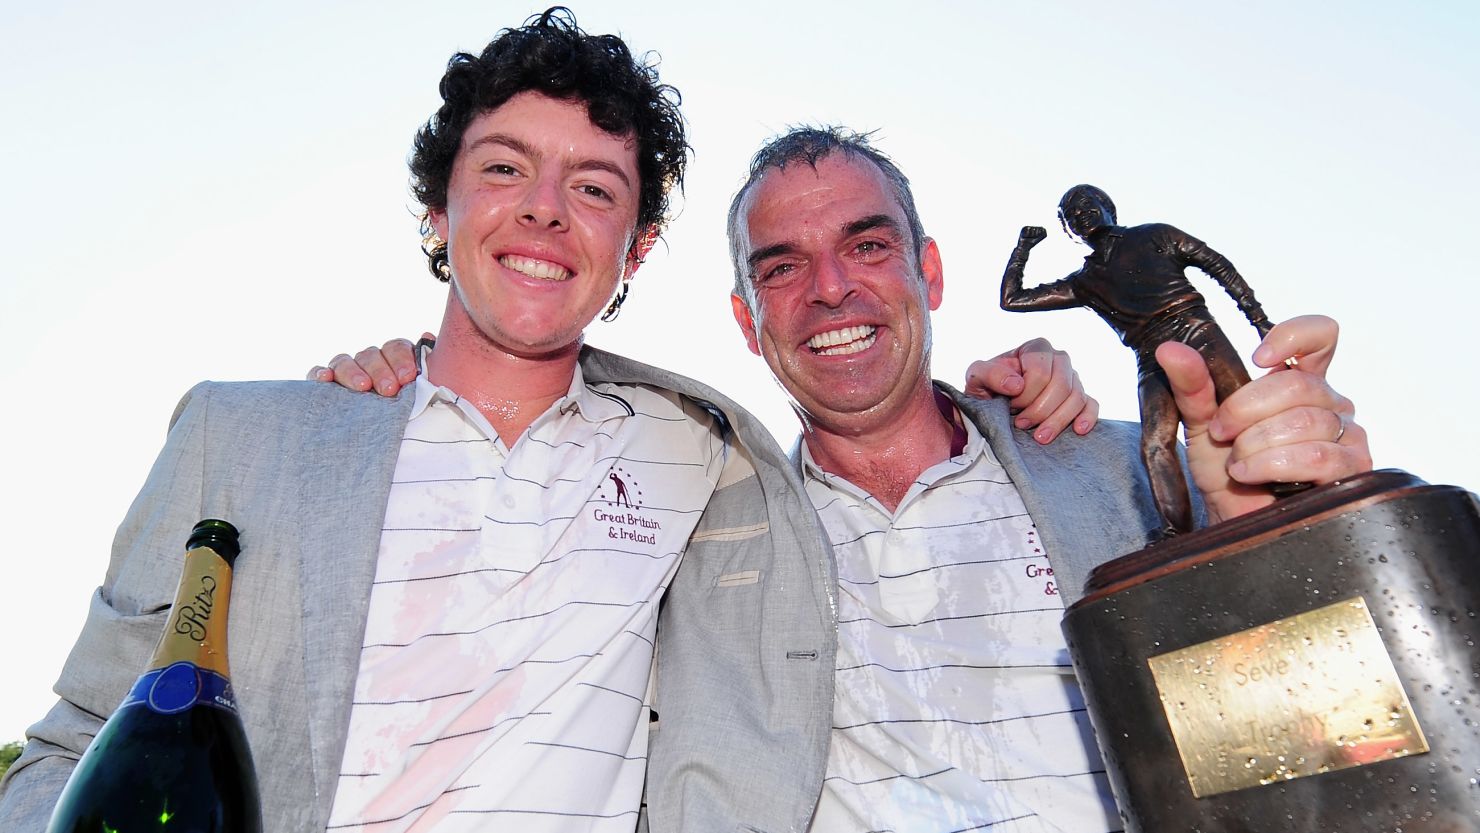 Paul McGinley (R) captained Rory McIlroy in the Seve Trophy in 2009 when GB & Ireland took on Continental Europe